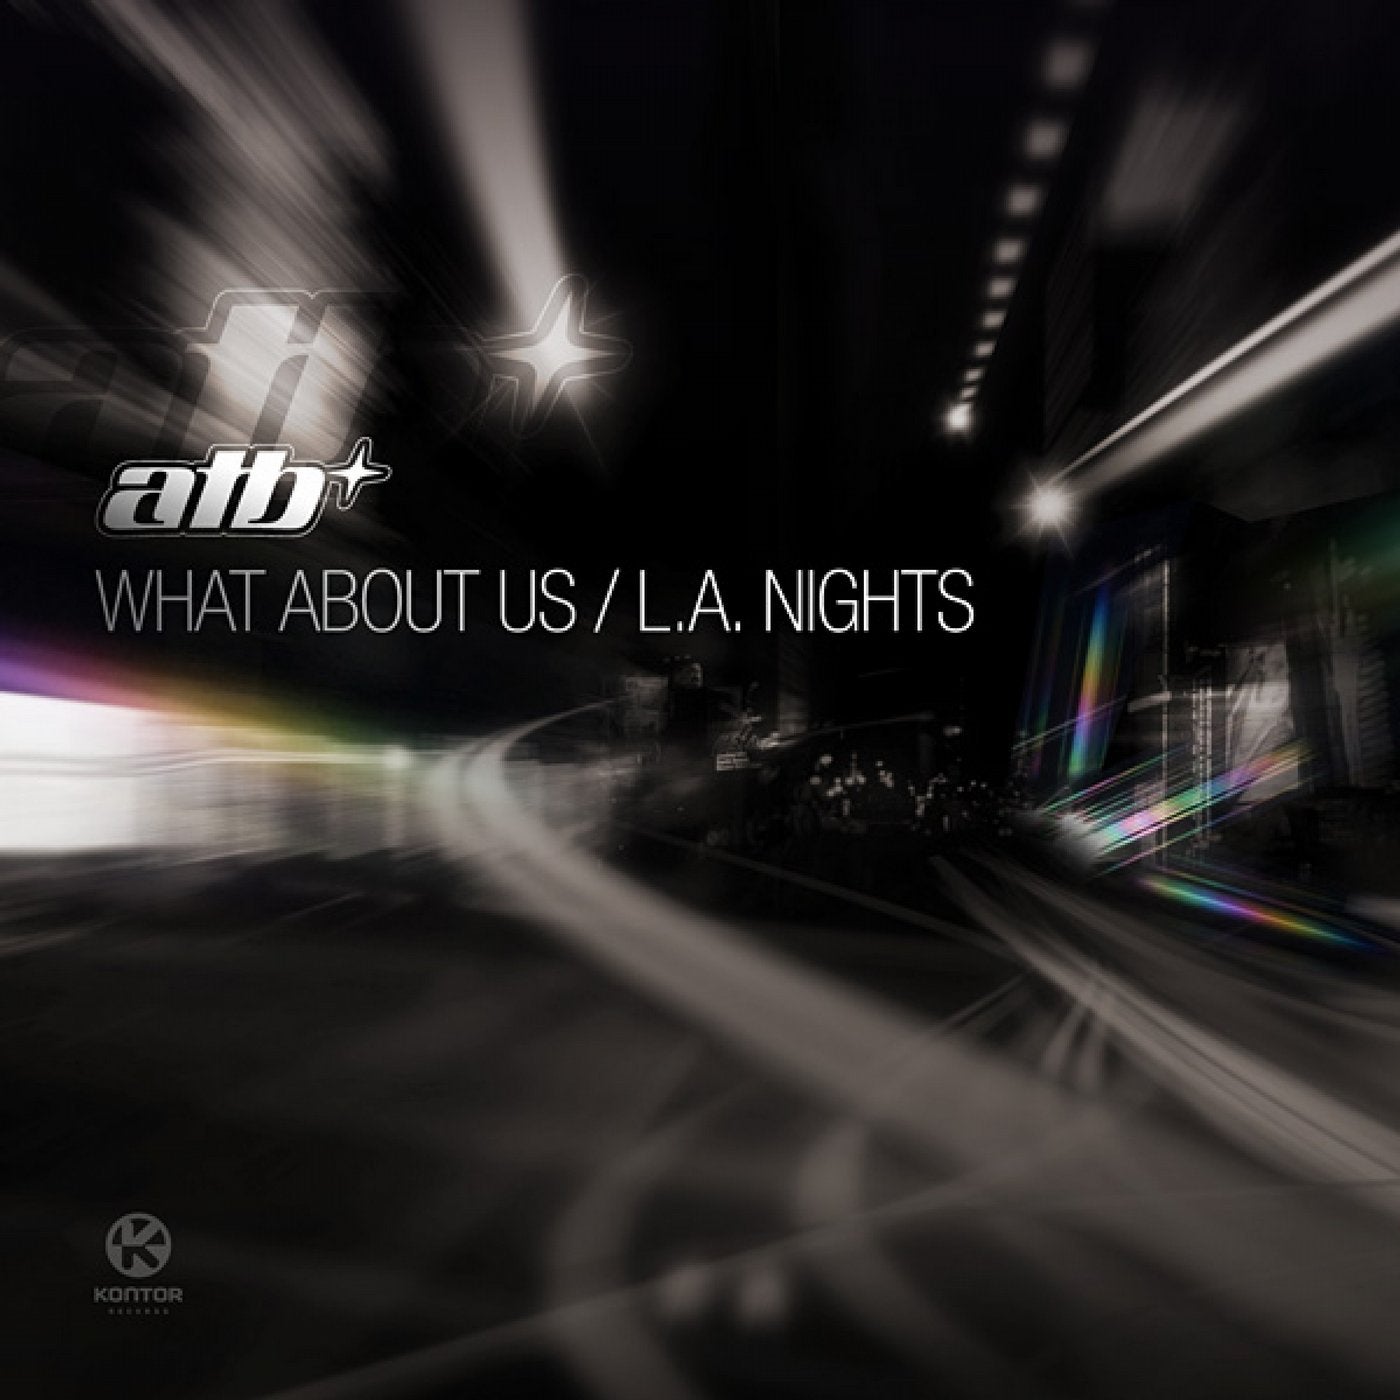 What About Us / L.A. Nights